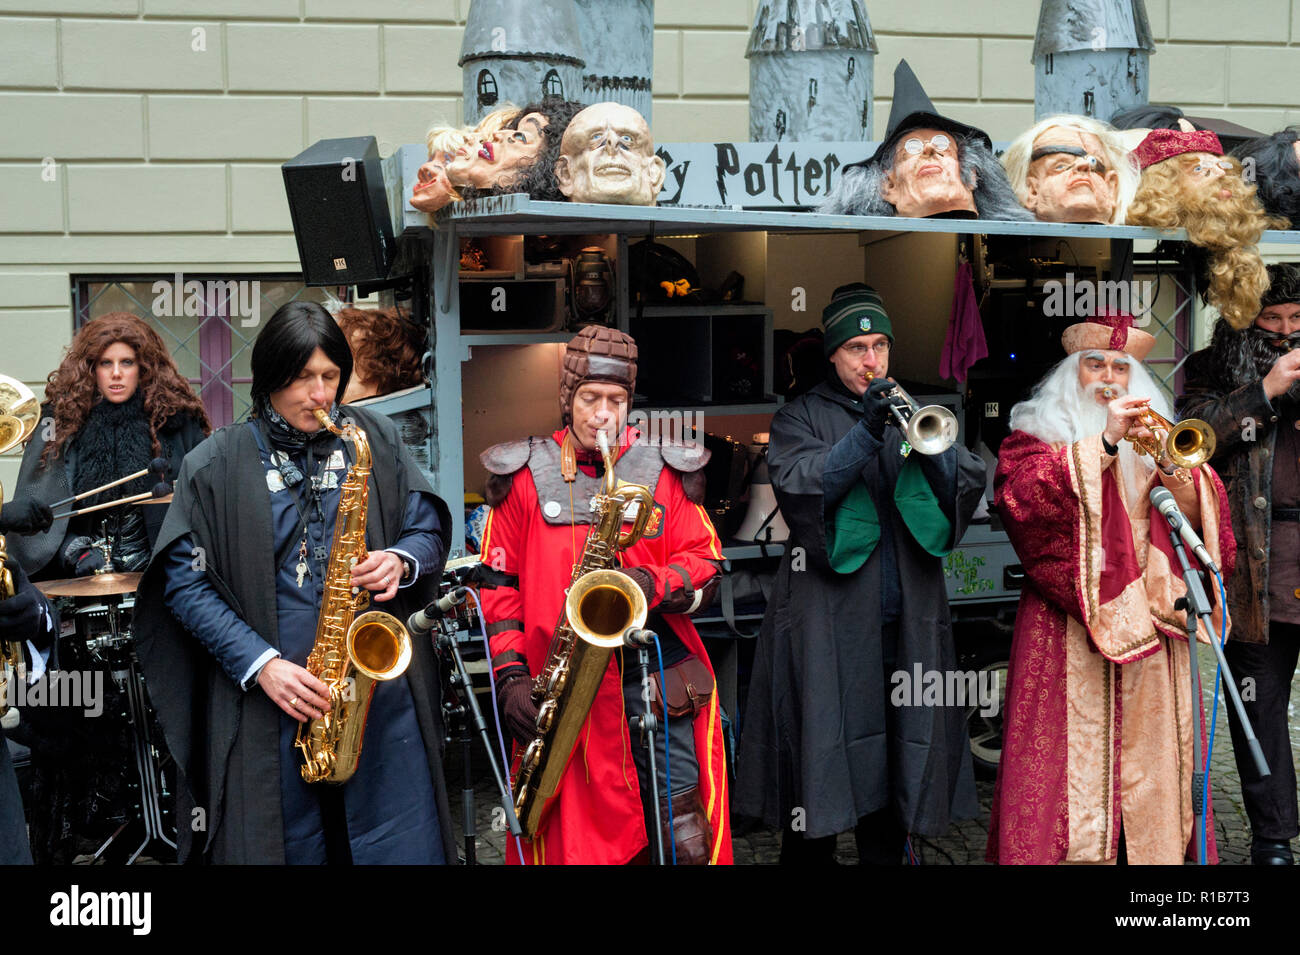 https://c8.alamy.com/comp/R1B7T3/musician-dressed-with-costumes-evoking-harry-potter-at-luzern-carnival-switzerland-R1B7T3.jpg